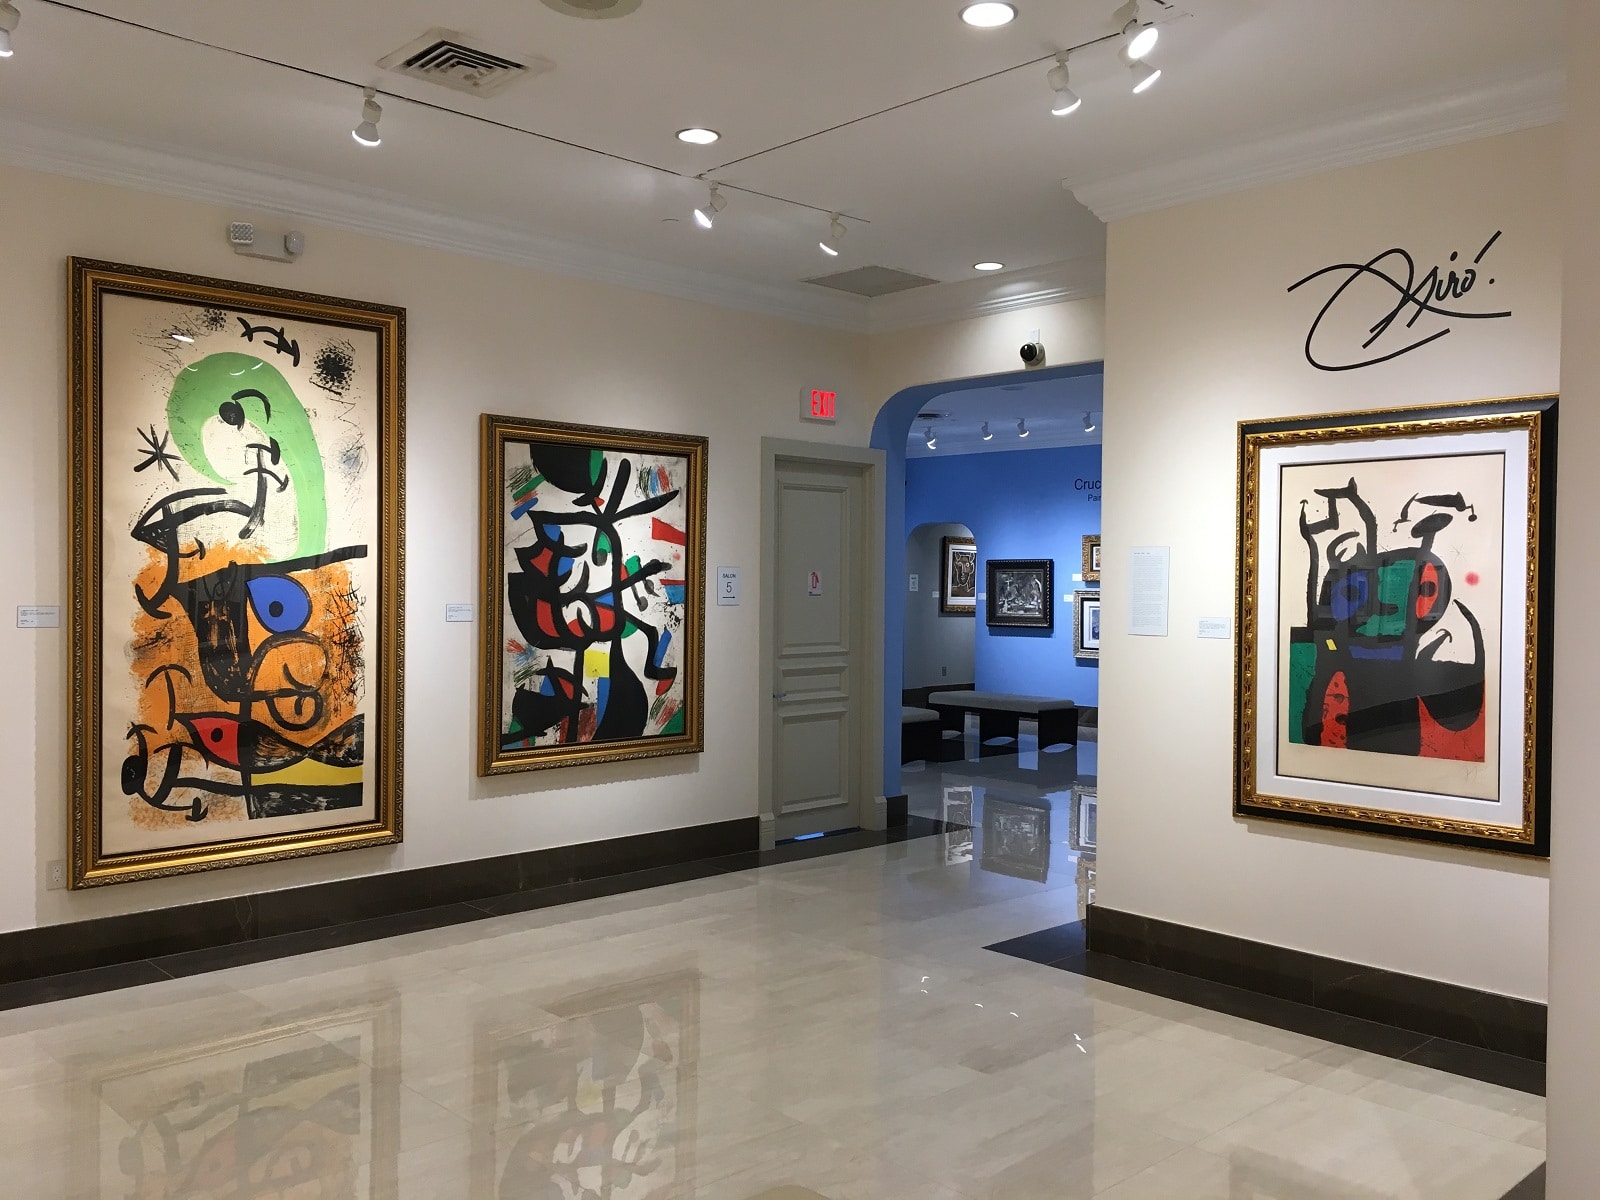 The Joan Miró gallery at Park West Museum.